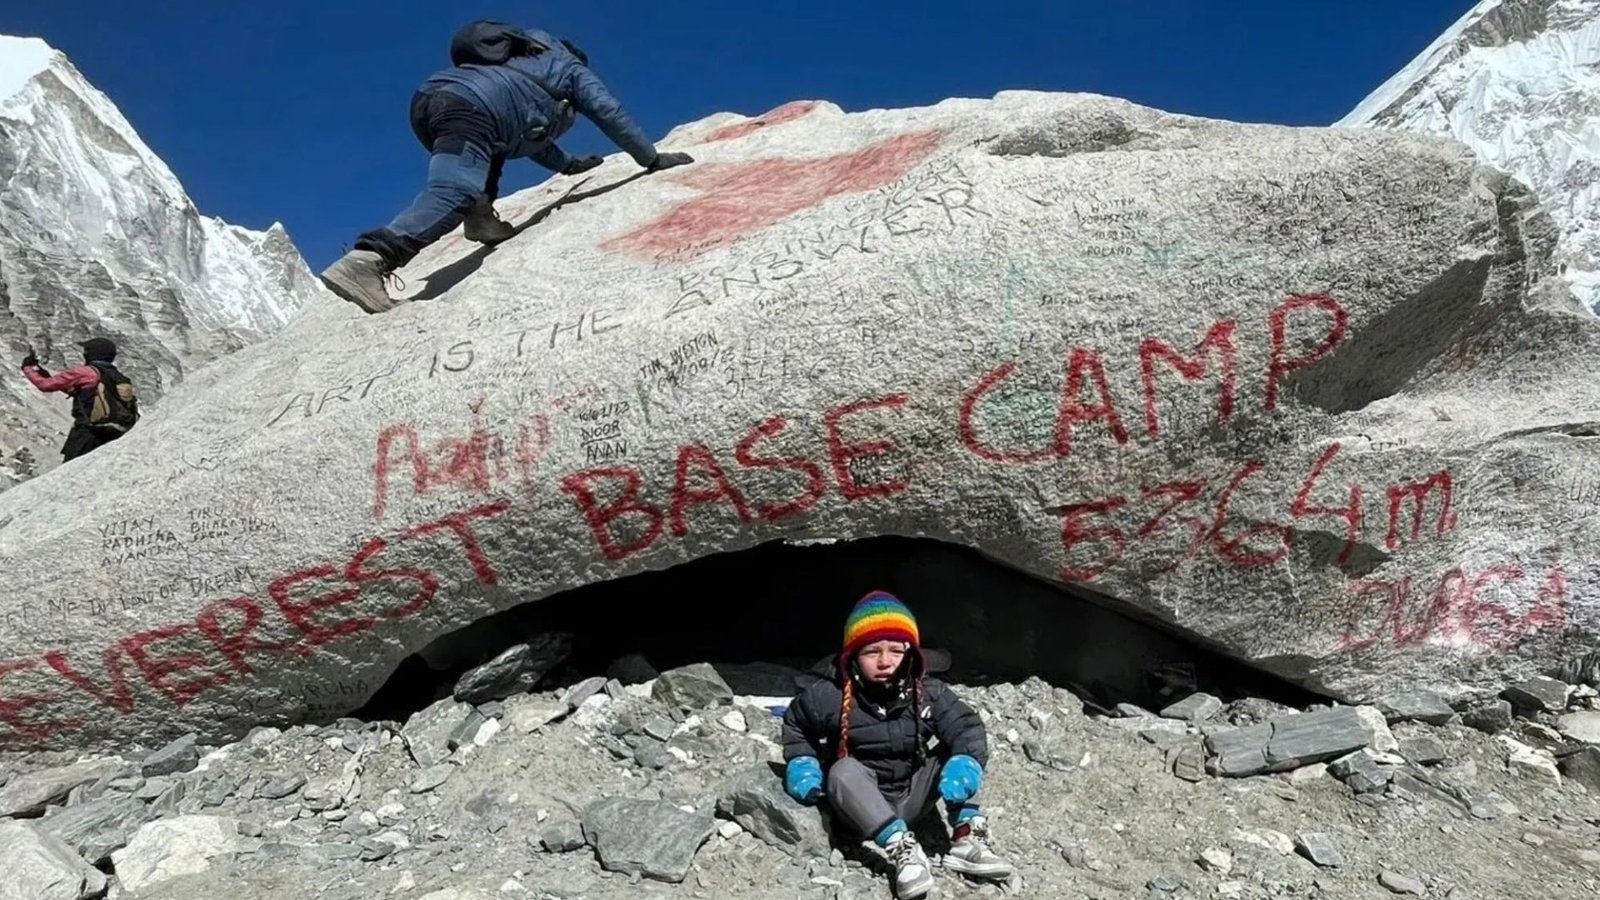 Intrepid Brit boy, 2, ‘becomes youngest person to reach Everest base camp’